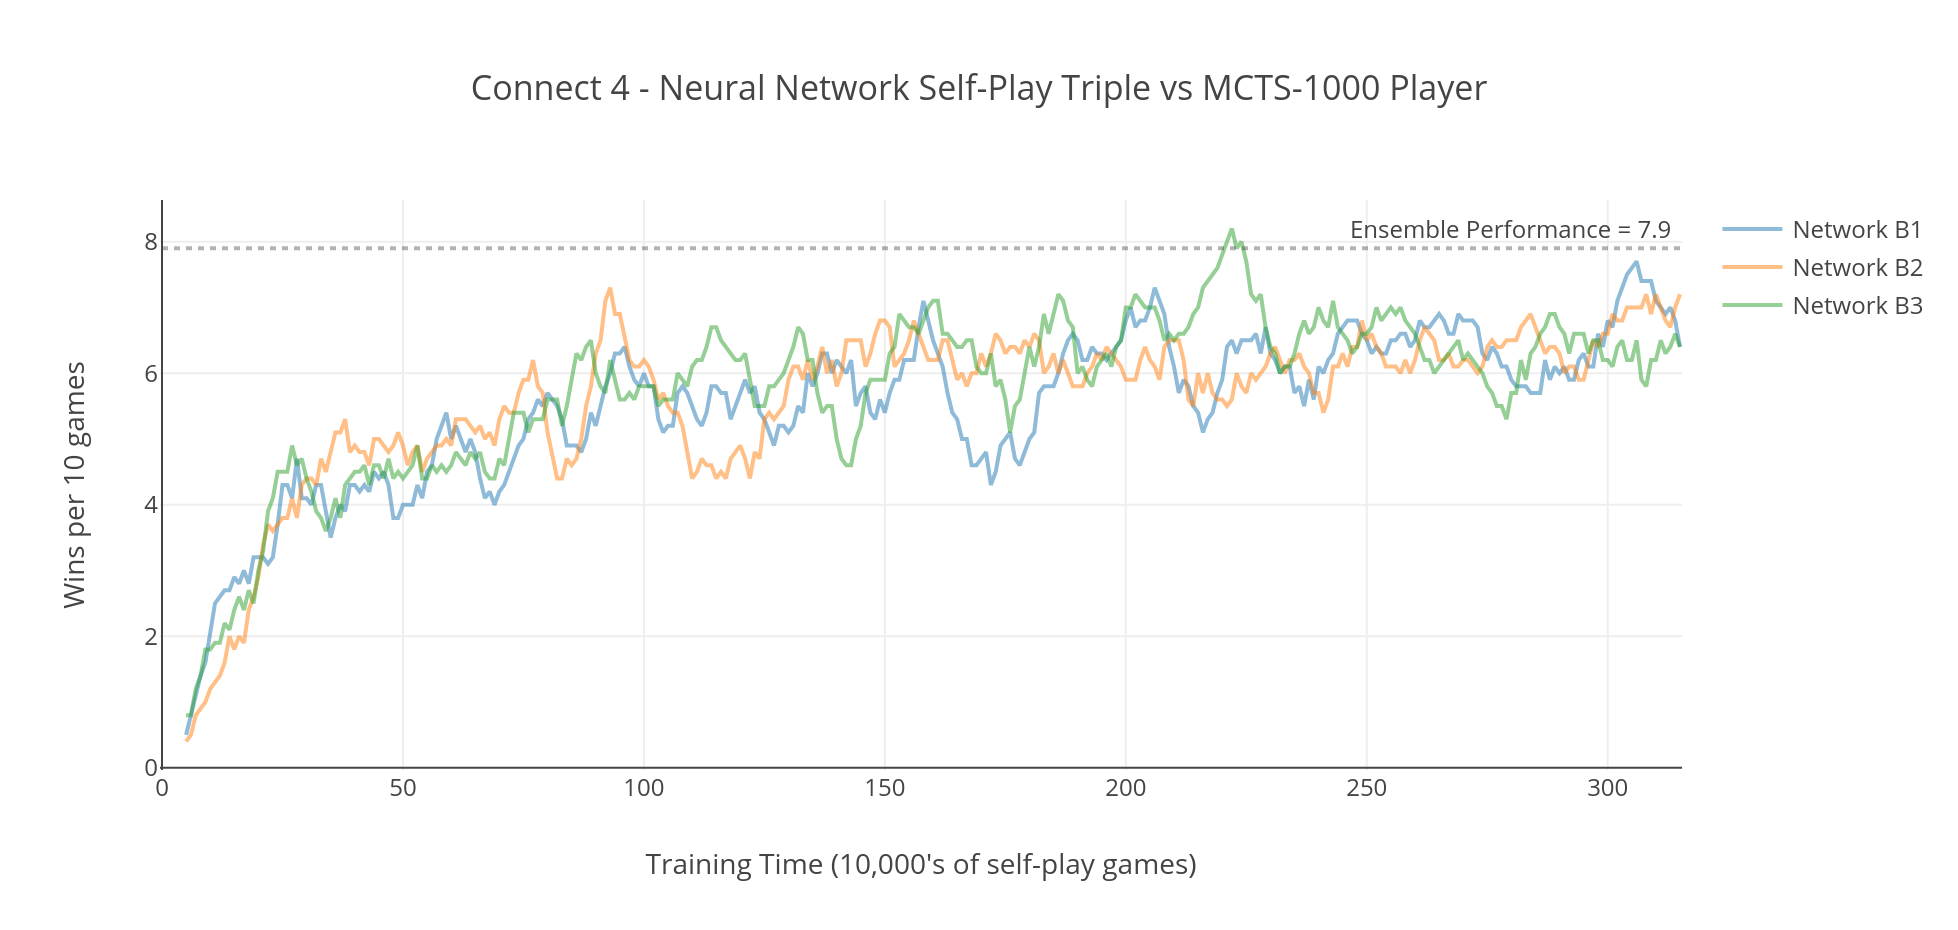 Graph showing a Neural Network ensemble playing against a MCTS-1000 Player in a game of Connect 4